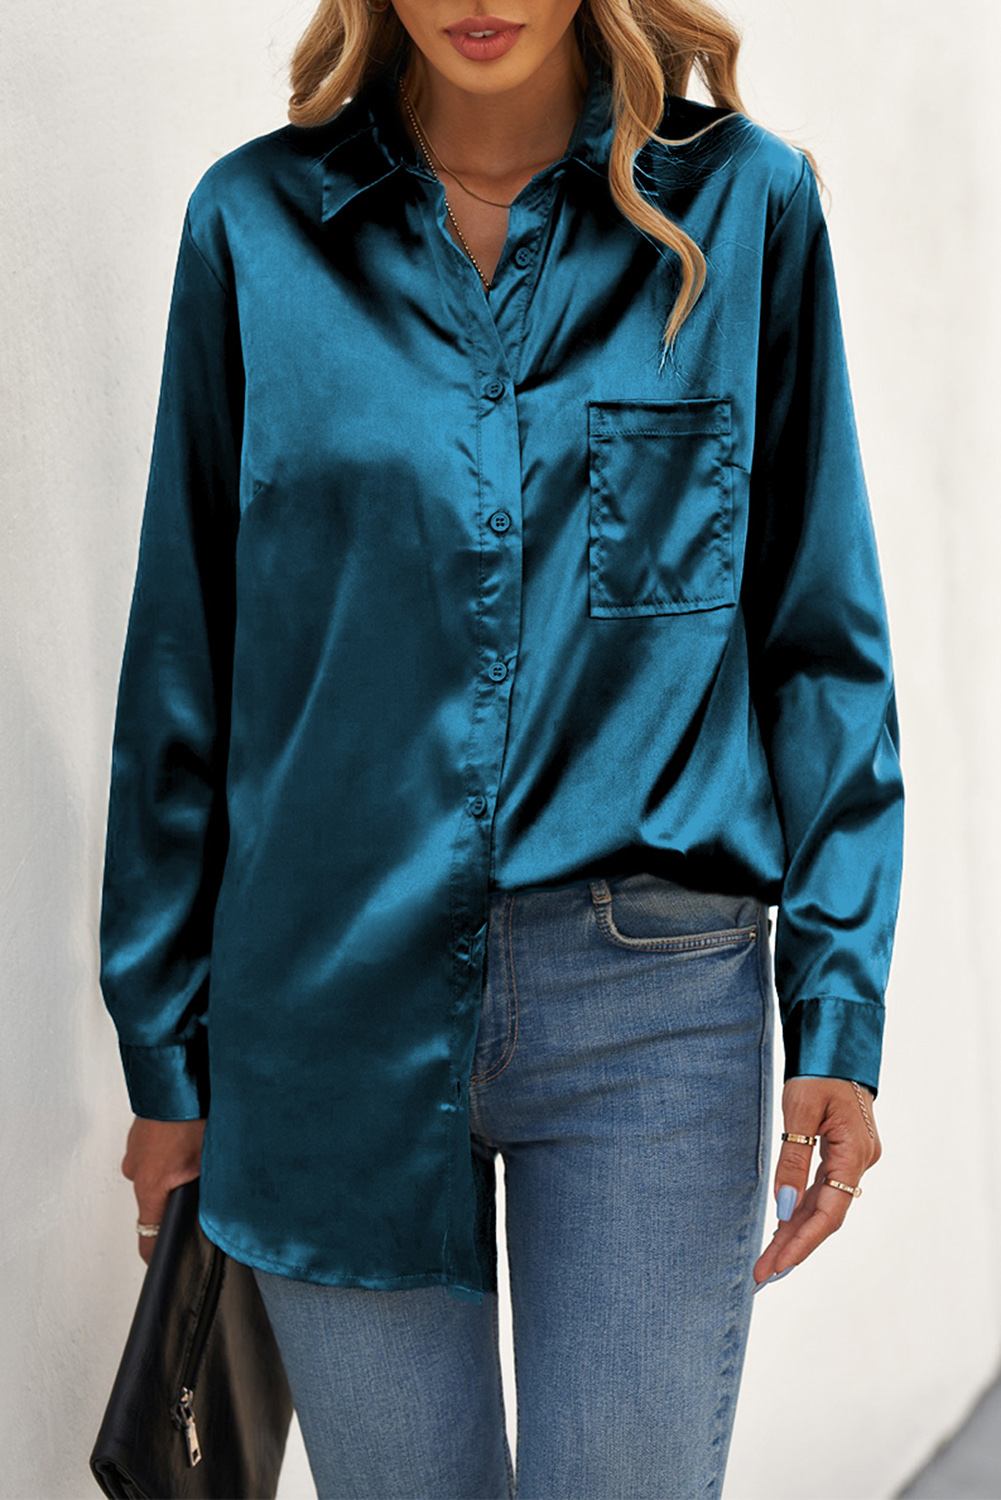 US$ 8.03 Drop-shipping Green Satin Button Shirt with Pocket for Women